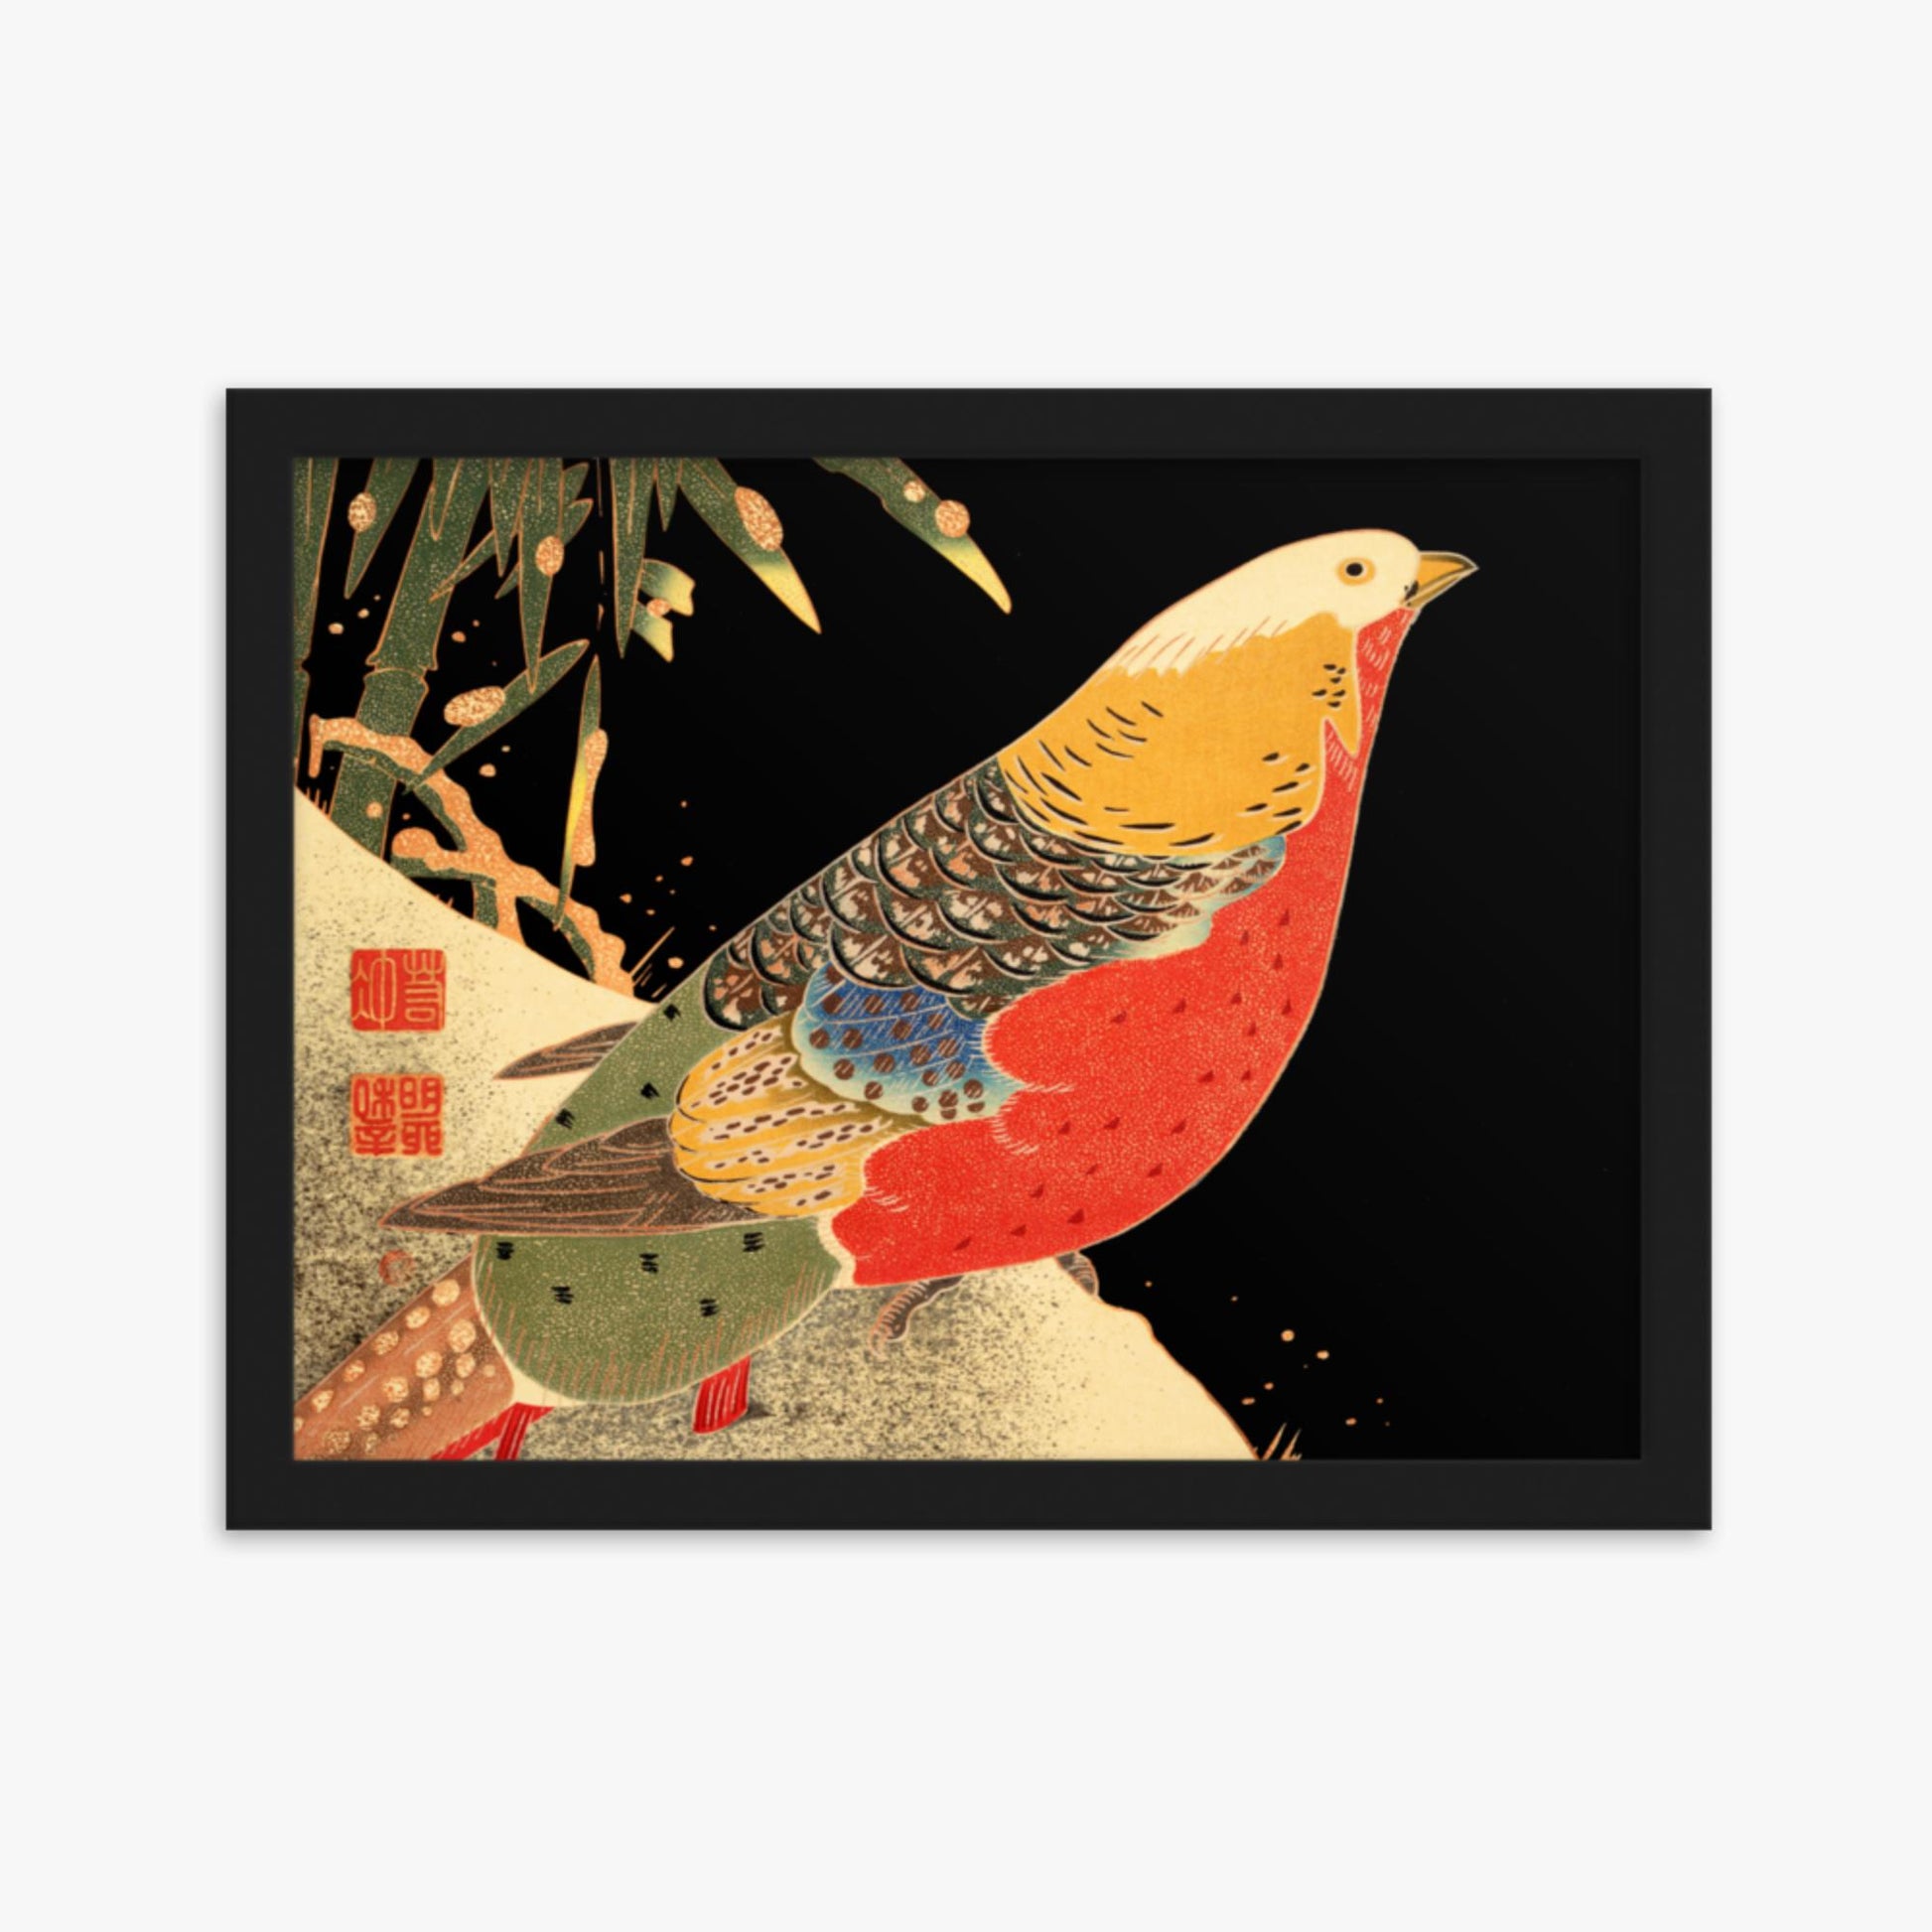 Ito Jakuchu - Golden Pheasant in the Snow 30x40 cm Poster With Black Frame